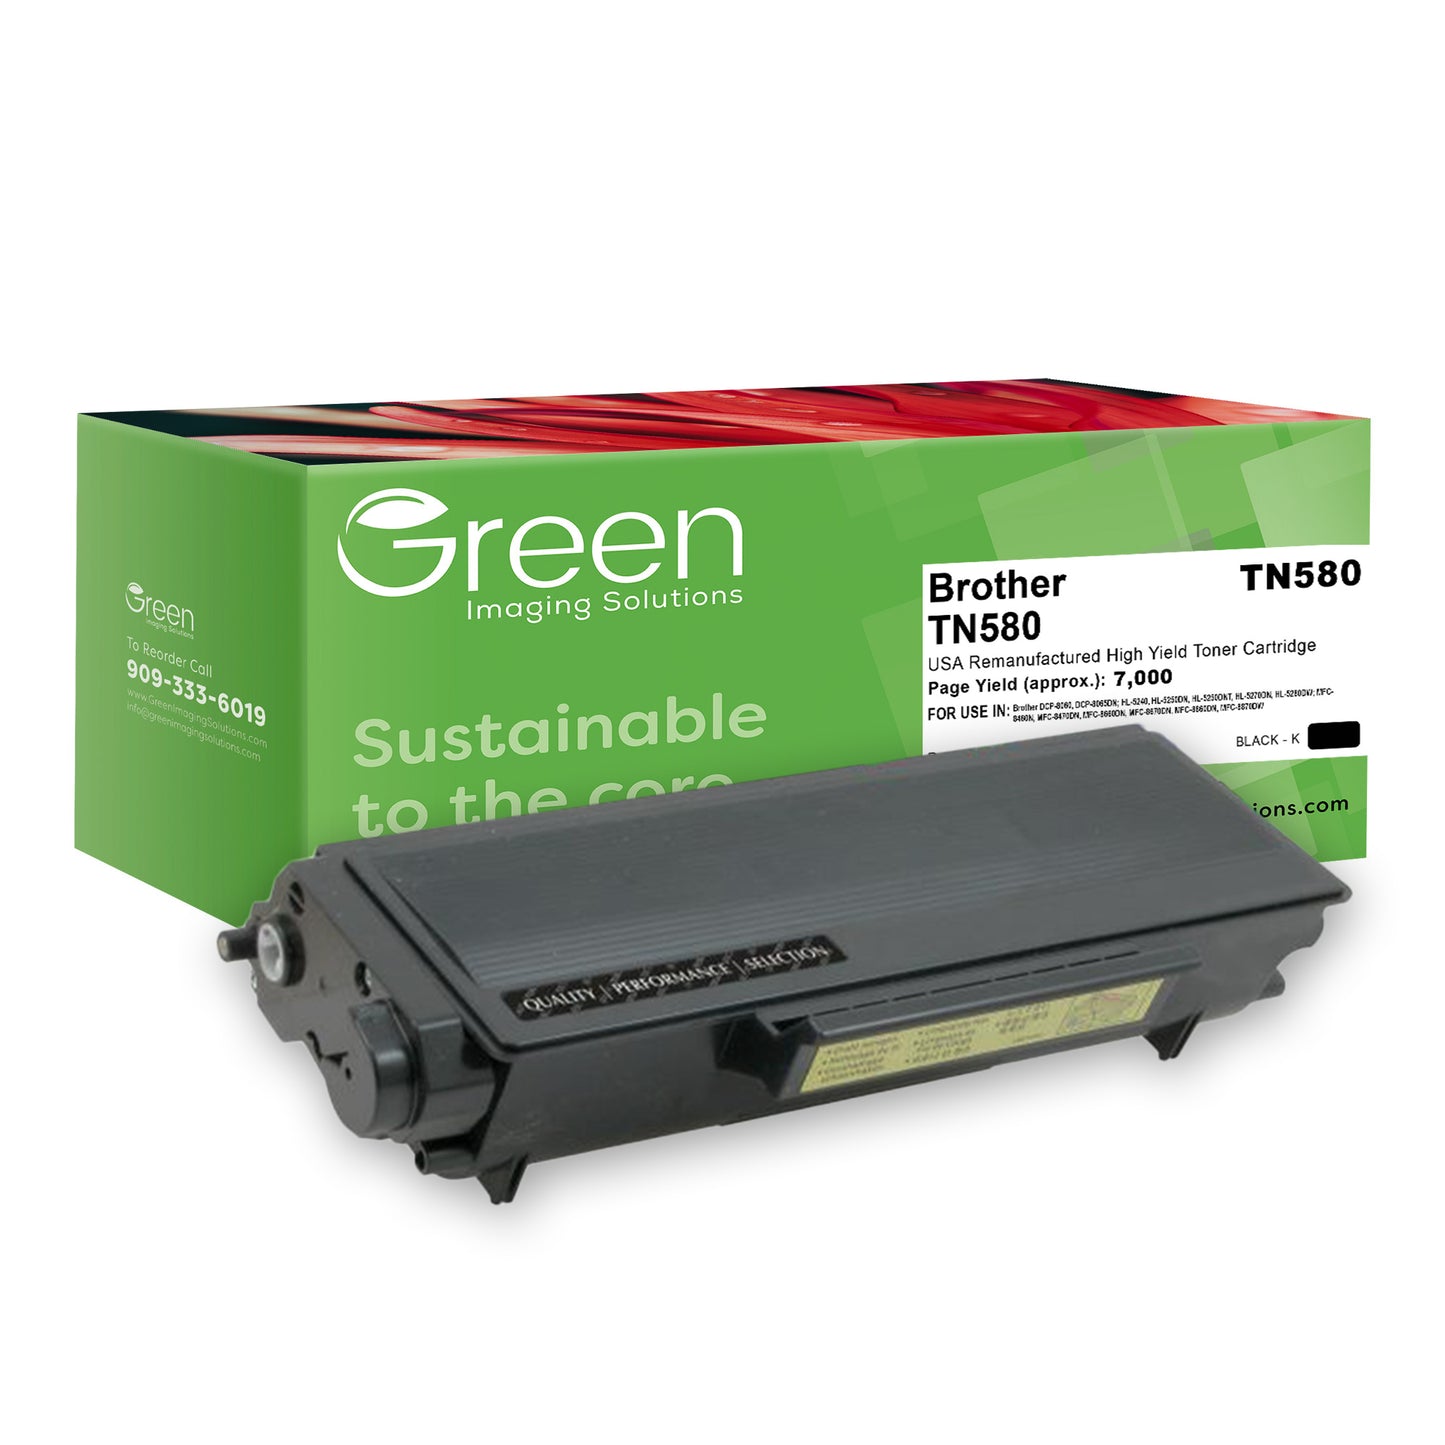 Green Imaging Solutions USA Remanufactured High Yield Toner Cartridge for Brother TN580